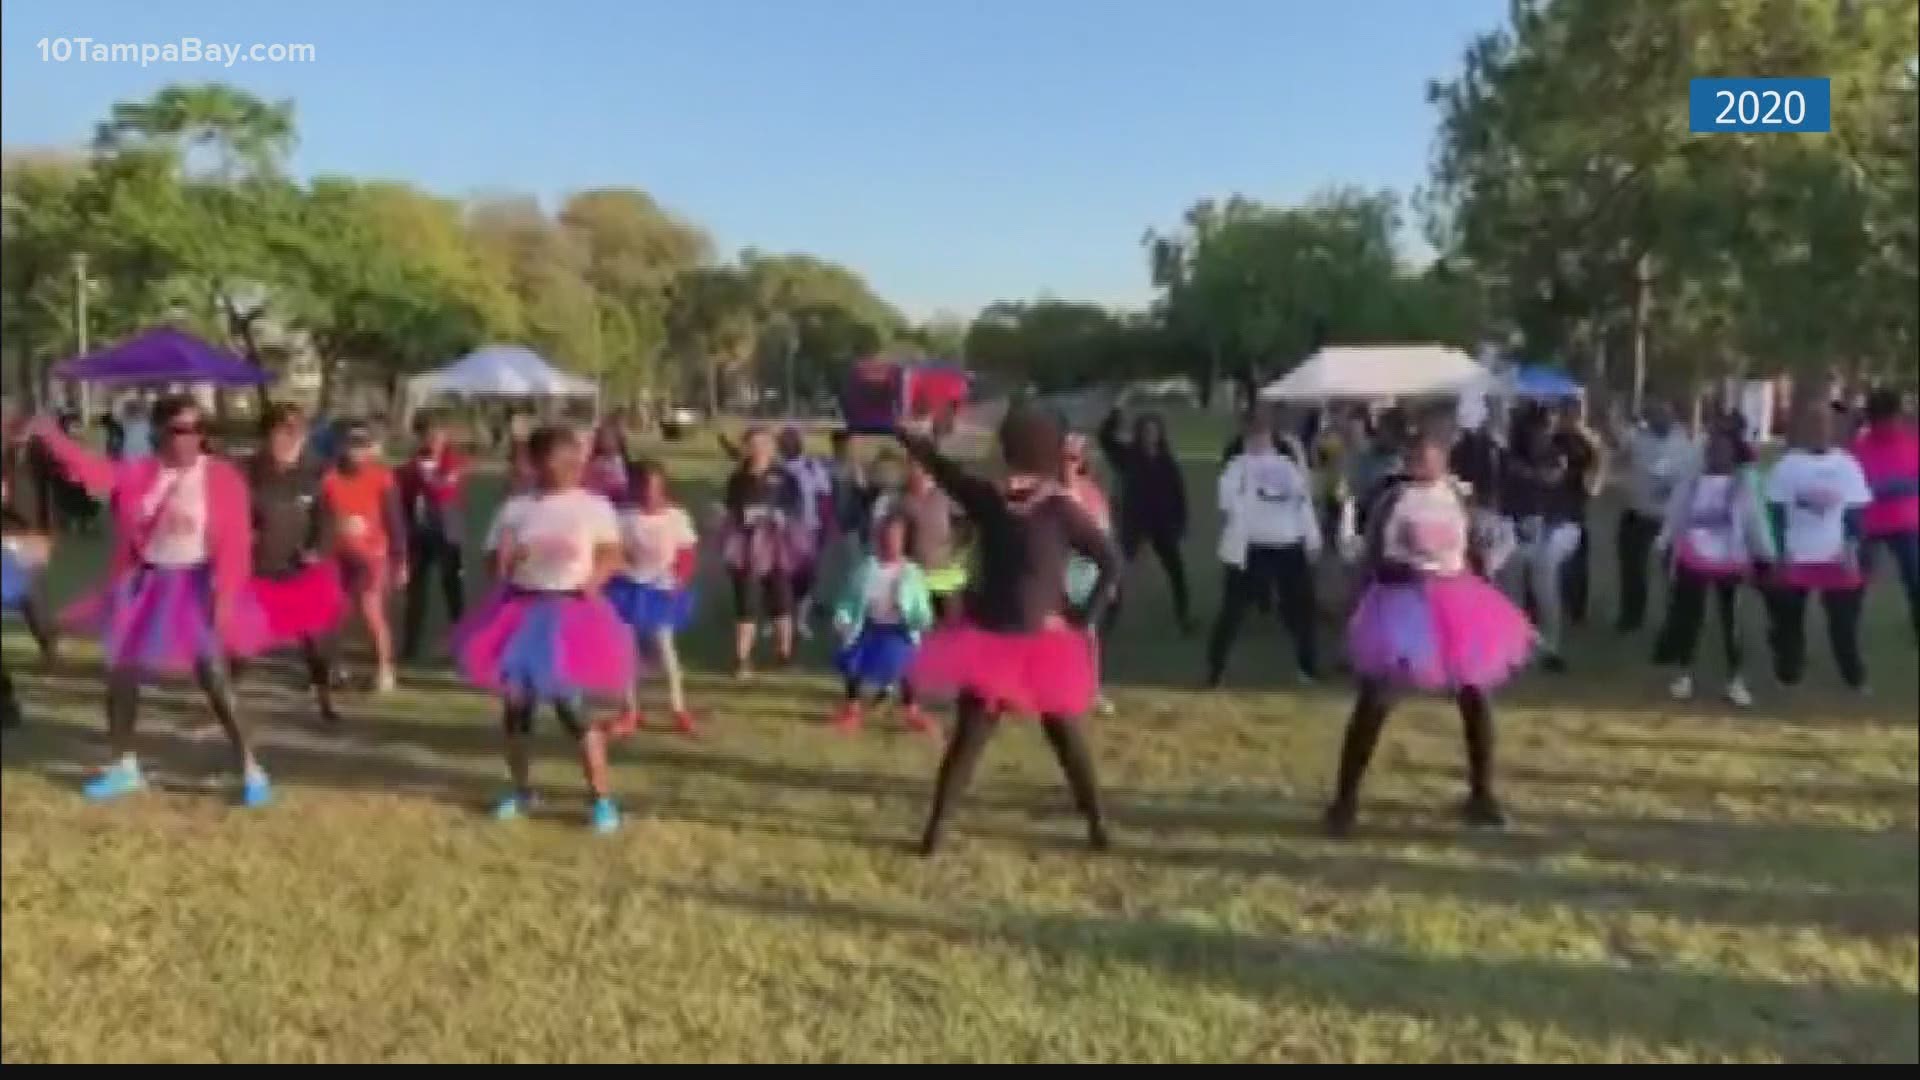 The Tutus and Tennis Shoes event raises money and brings awareness to issues affecting African American children and families.